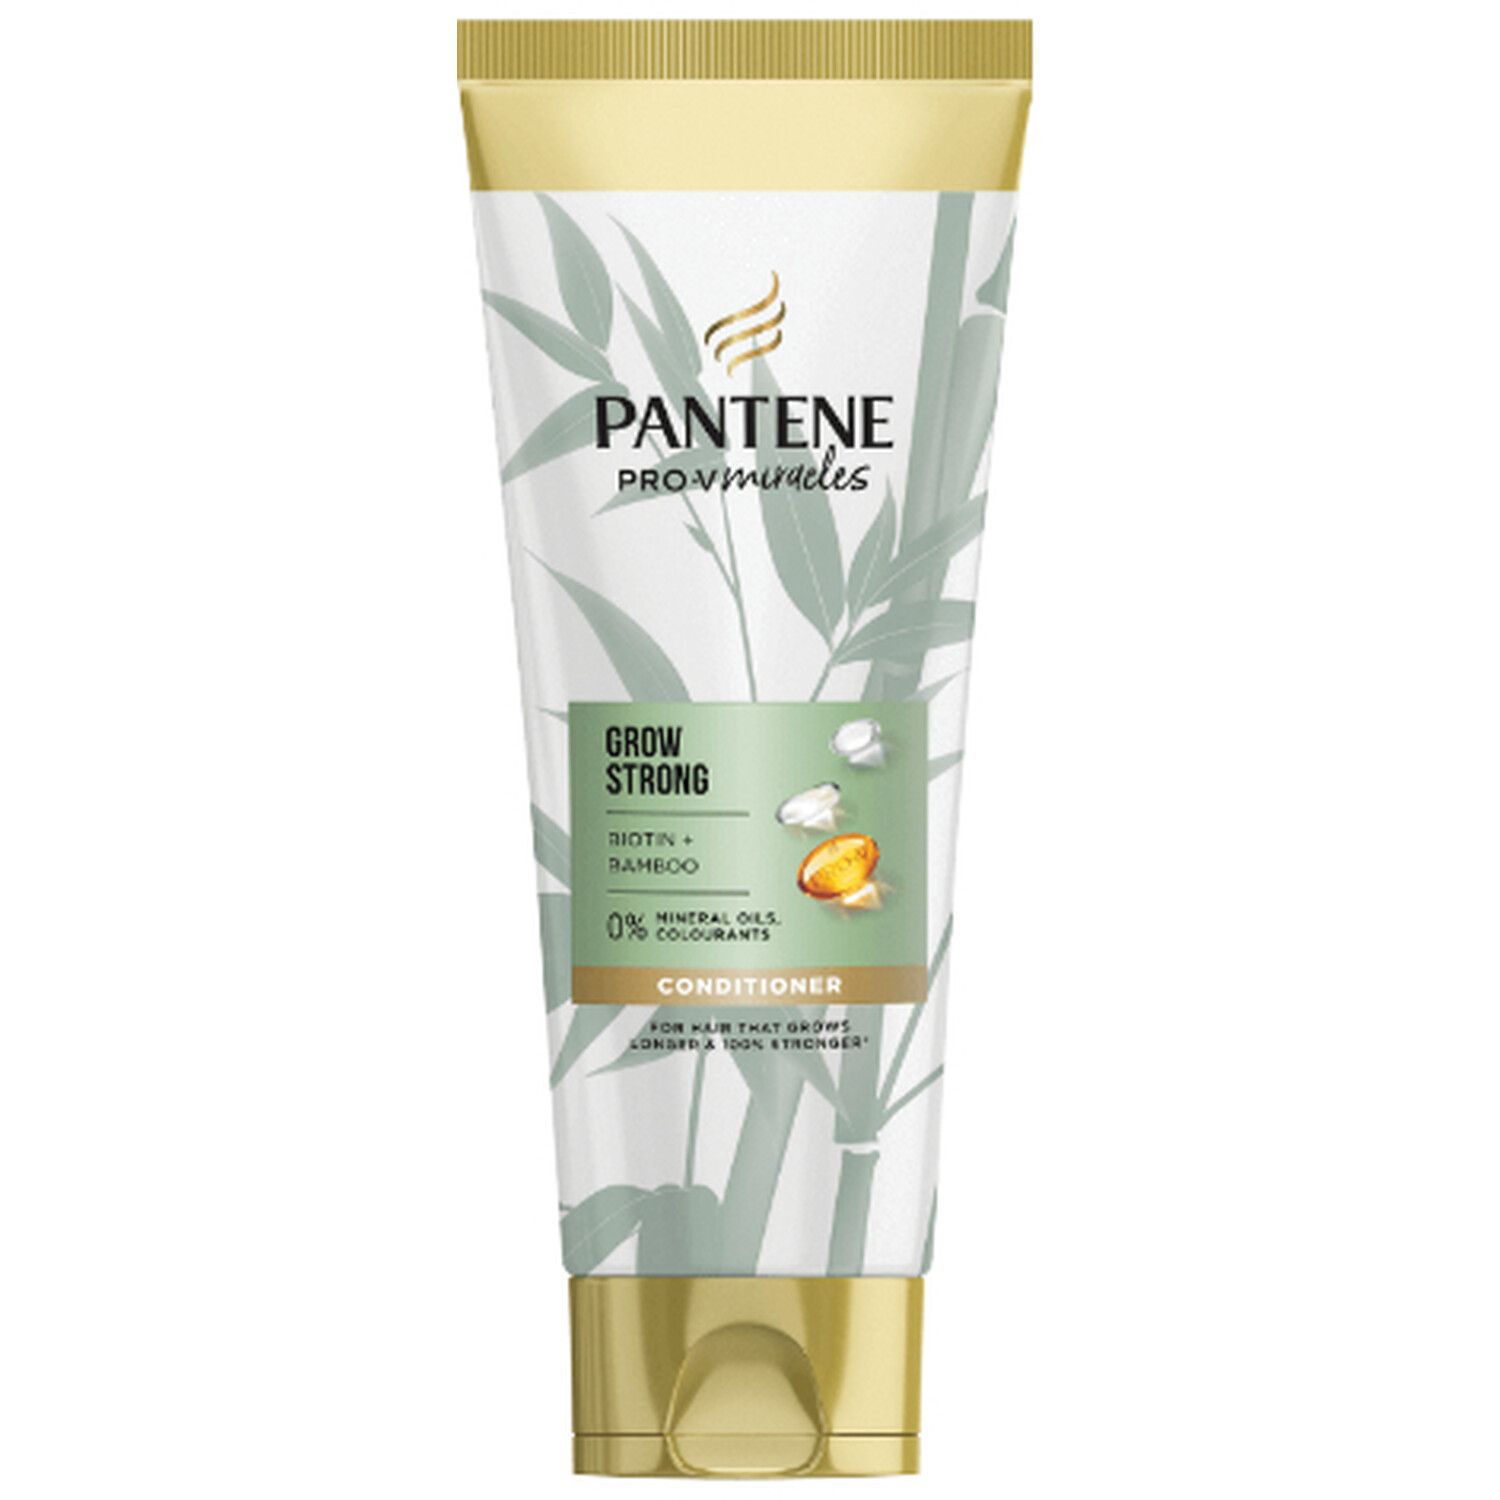 Pantene Pro-V Miracles Grow Strong Hair Conditioner 400ml Image